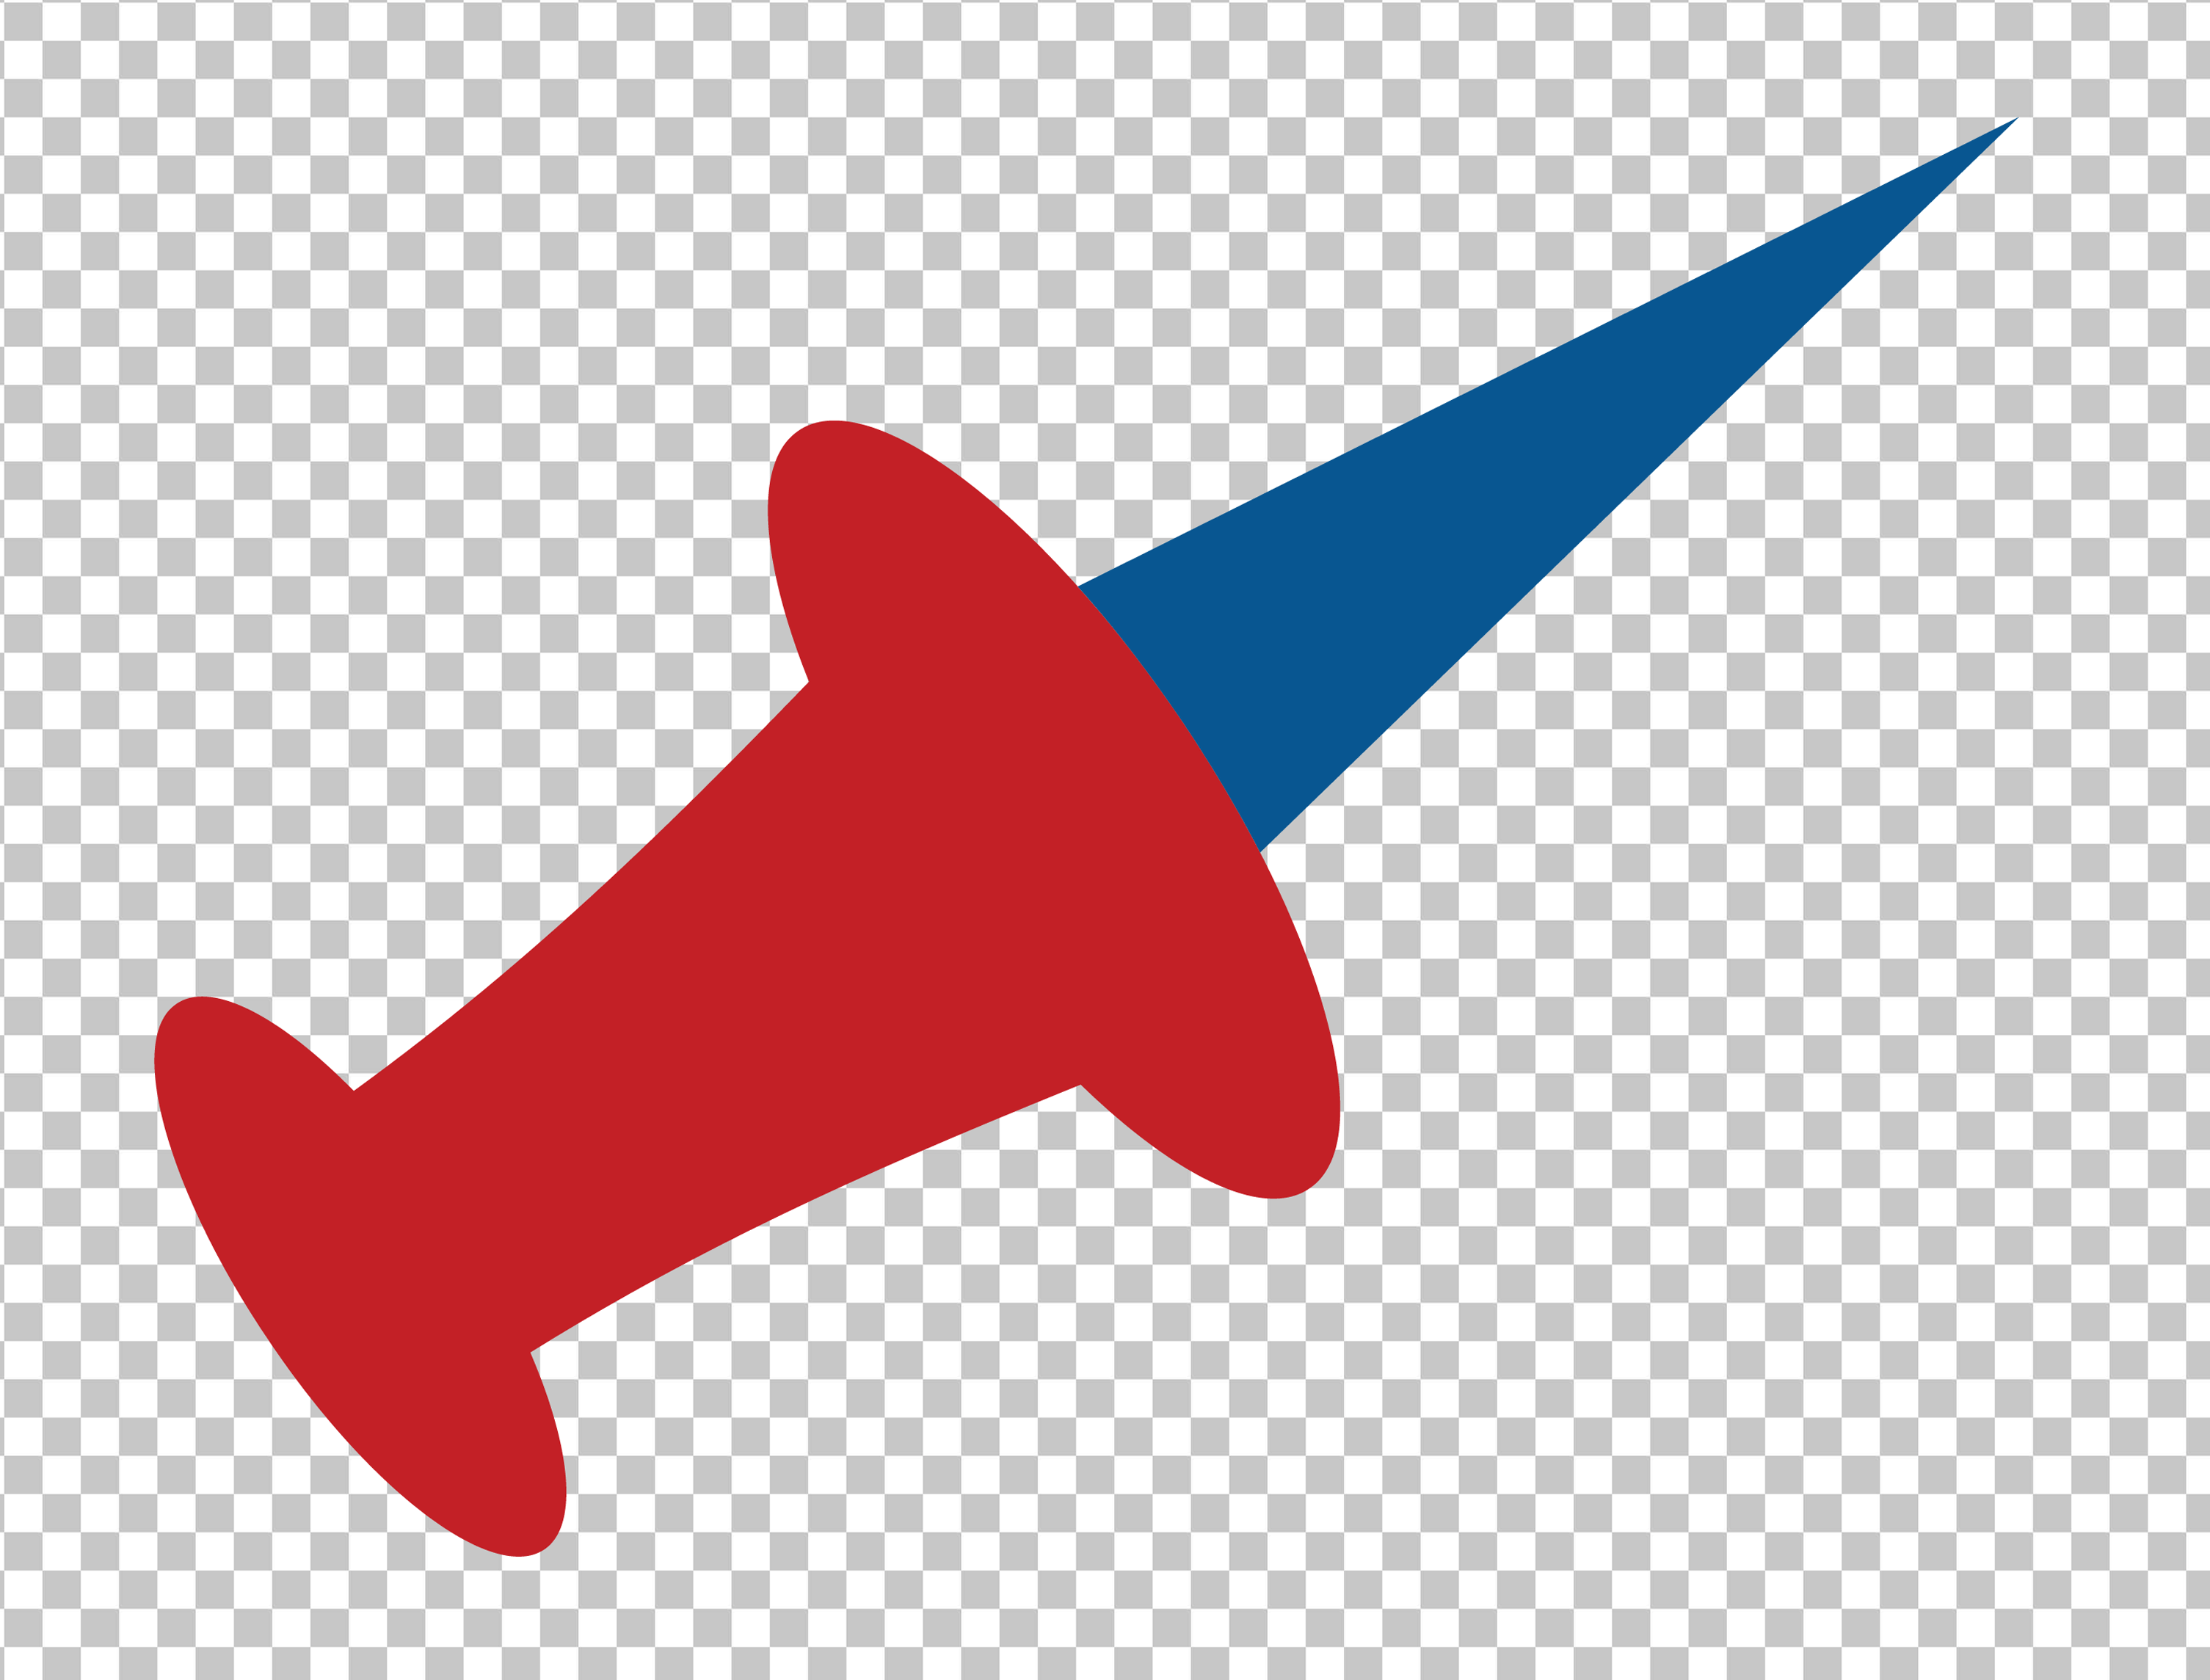 Red pin with blue tail on transparent background